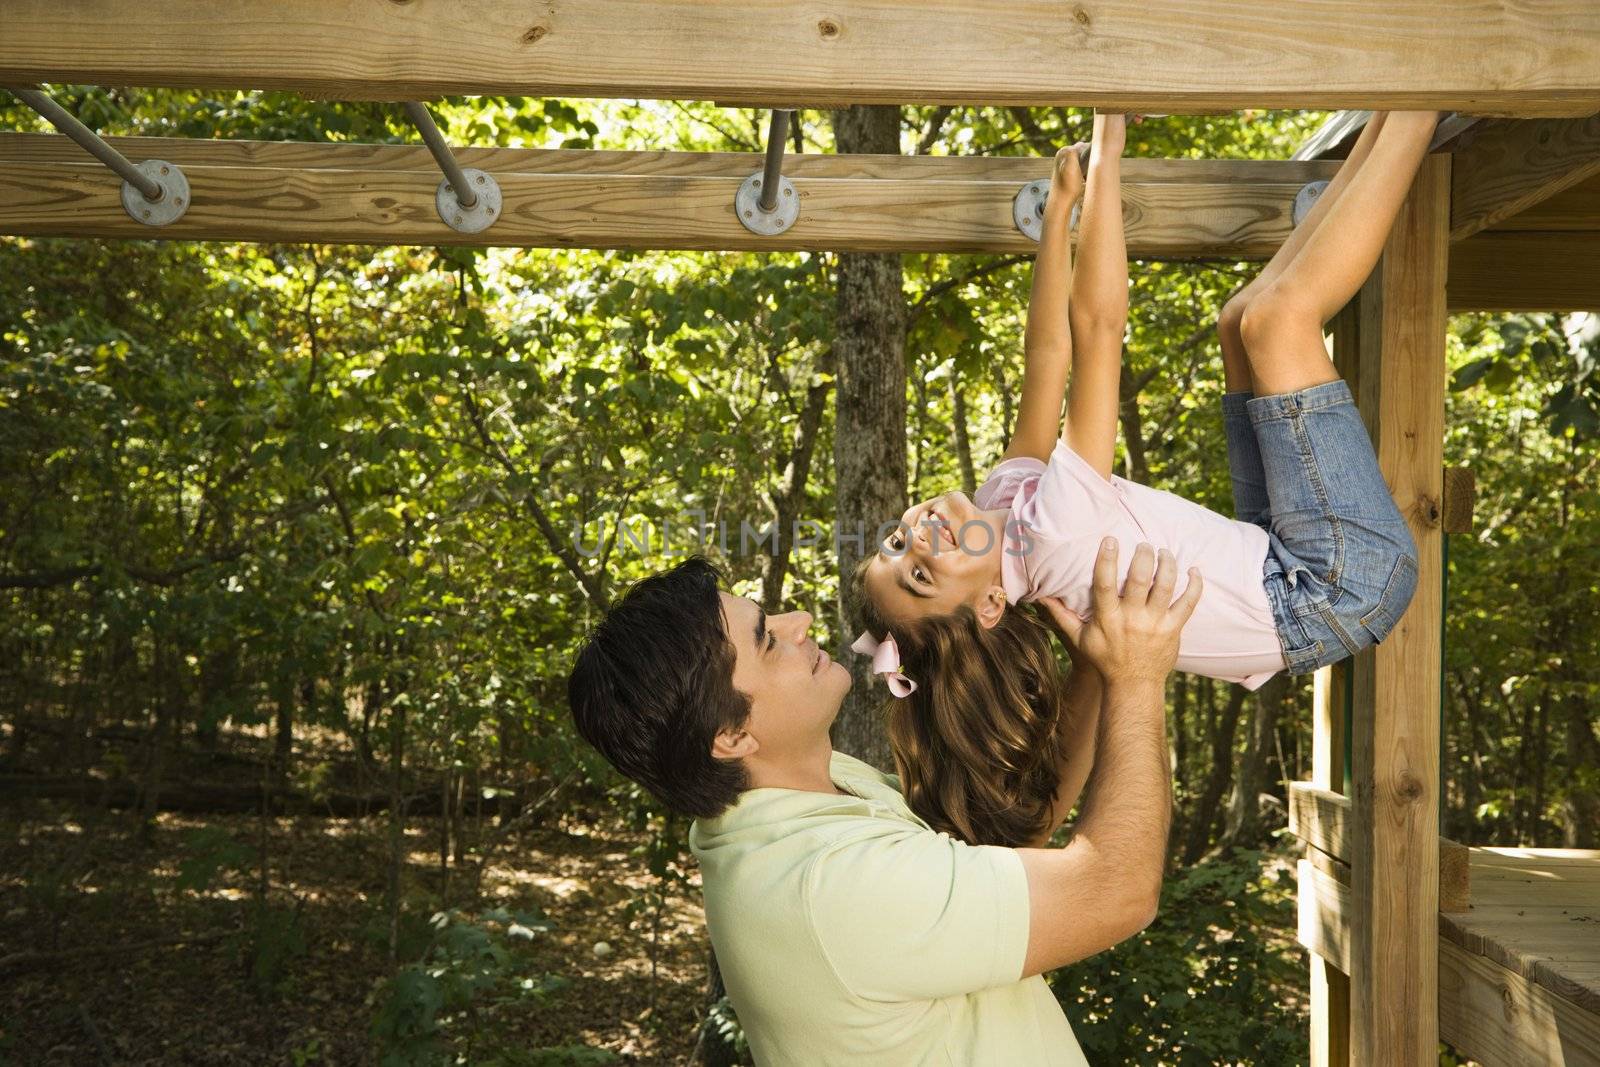 Hispanic girl hanging by arms and legs from monkey bars smiling at father helping her.